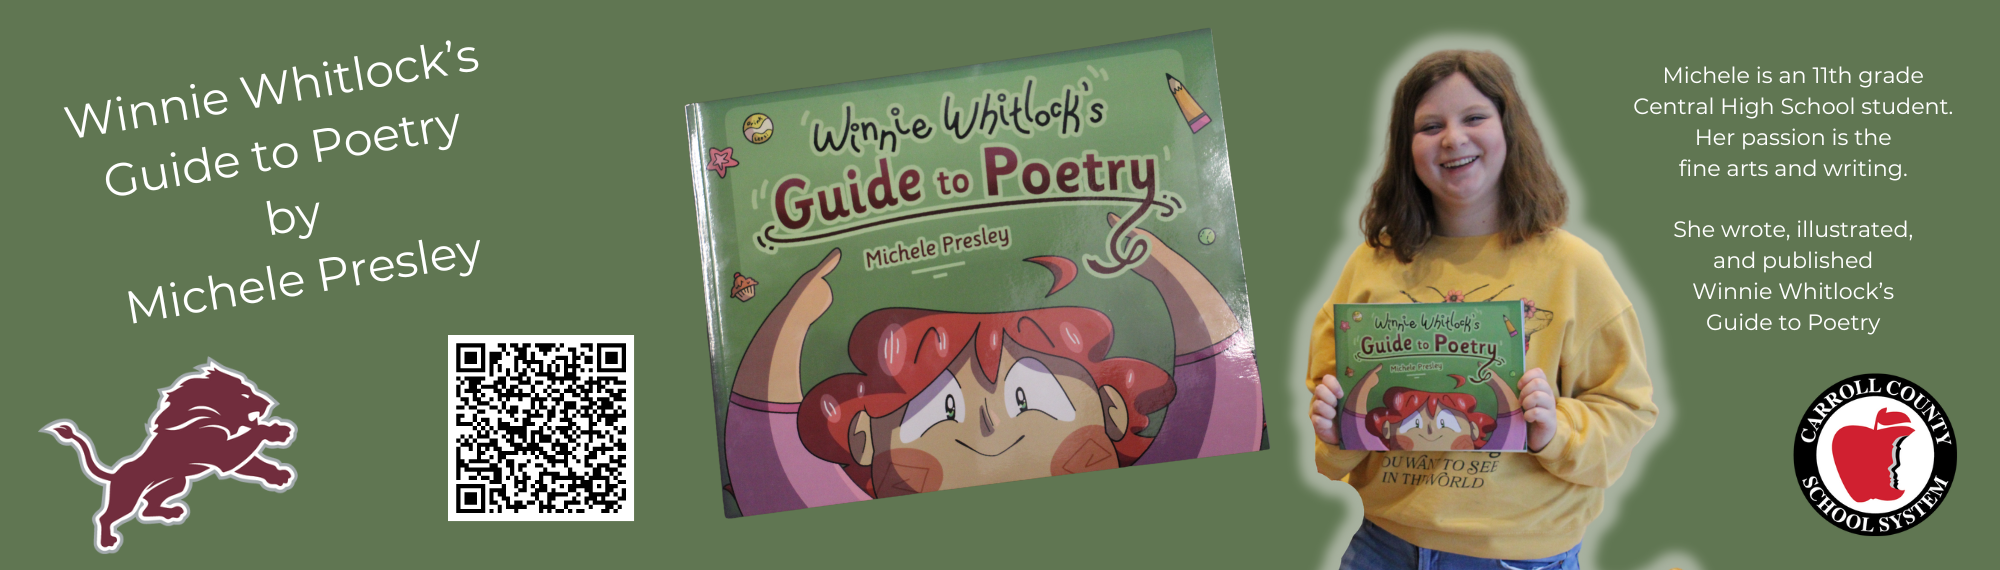 Winnie Whitlock's Guide to Poetry